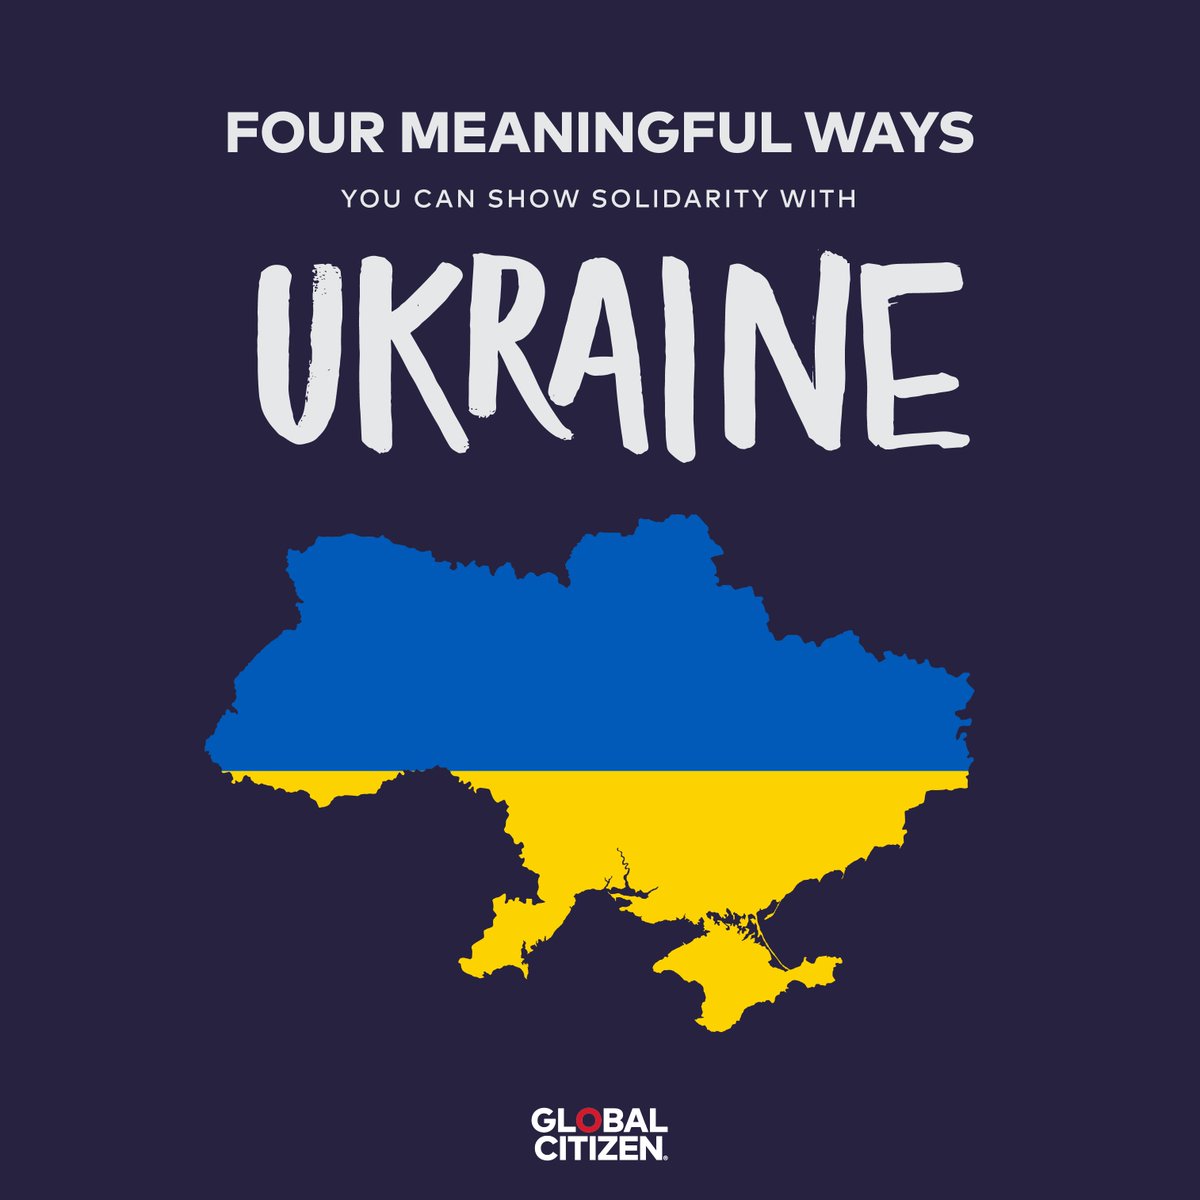 The world is watching the heartbreaking news unfold as Russia invades Ukraine. It’s a lot to process at once, but there are ways we can all support Ukraine from anywhere in the world. (thread 👇) #StandWithUkraine